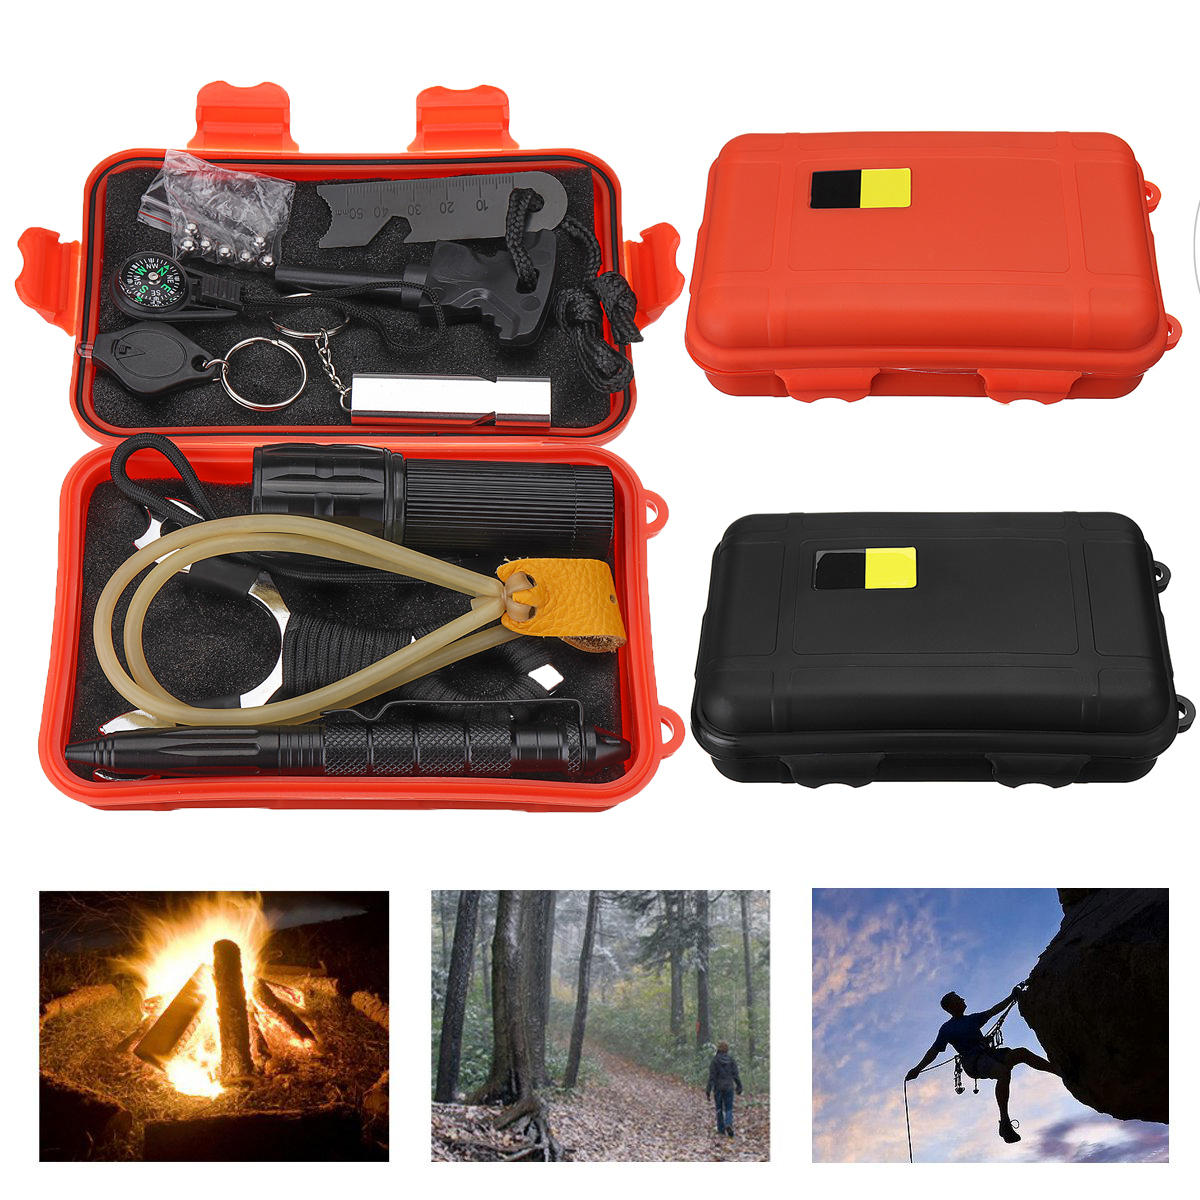 Outdoor 7 In 1 EDC Survival Tools Case SOS Emergency Multifunctional Kits Box Camping Hiking